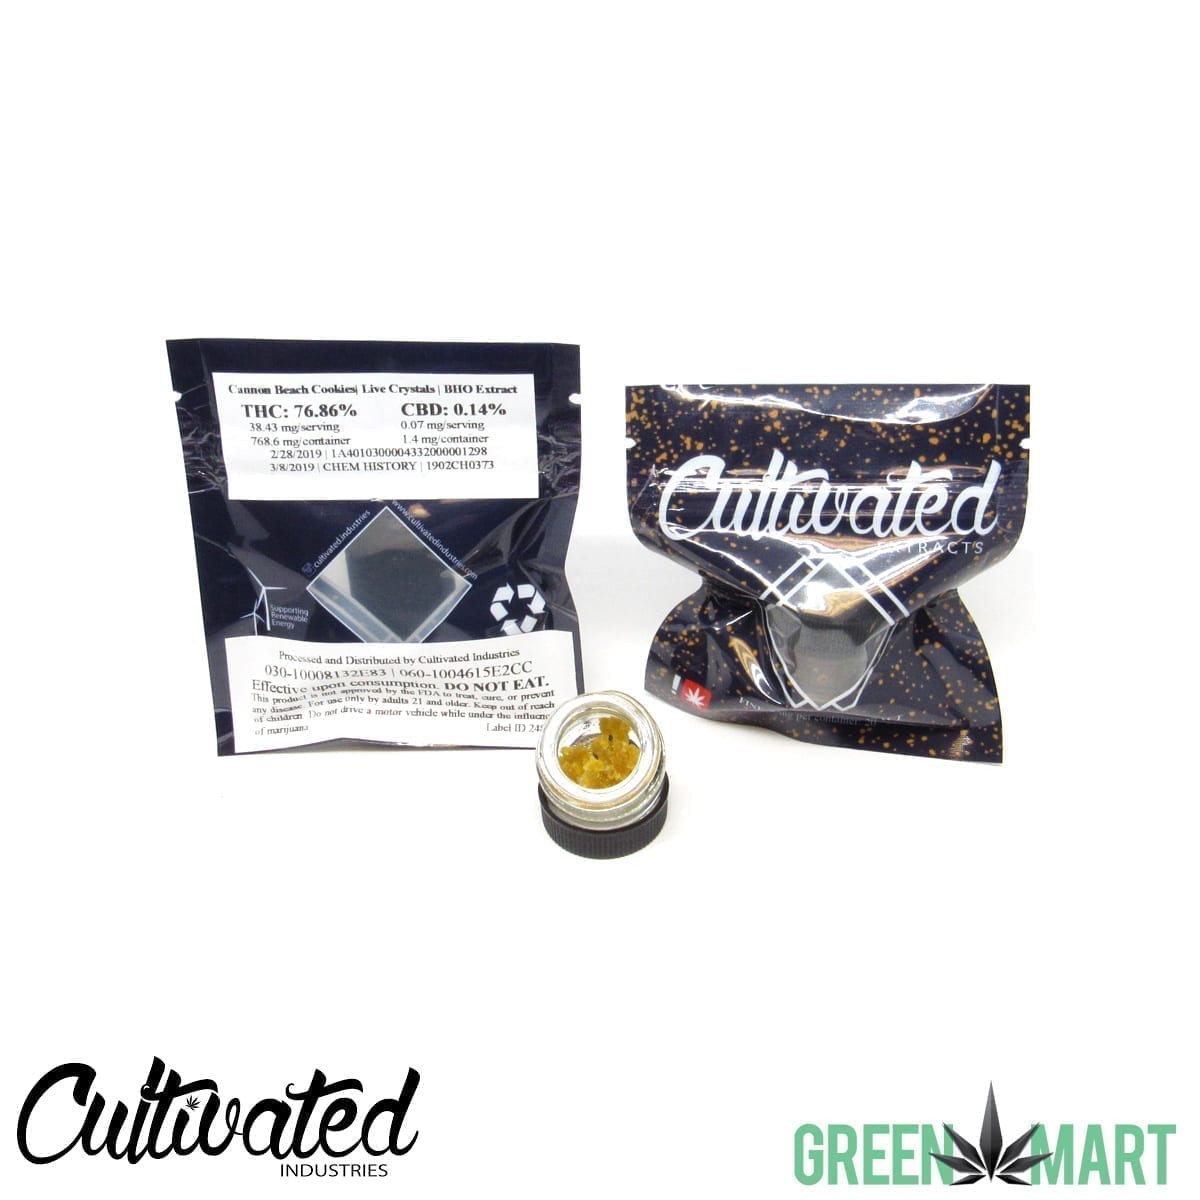 Cultivated Extracts - Cannon Beach Cookies Live Crystals